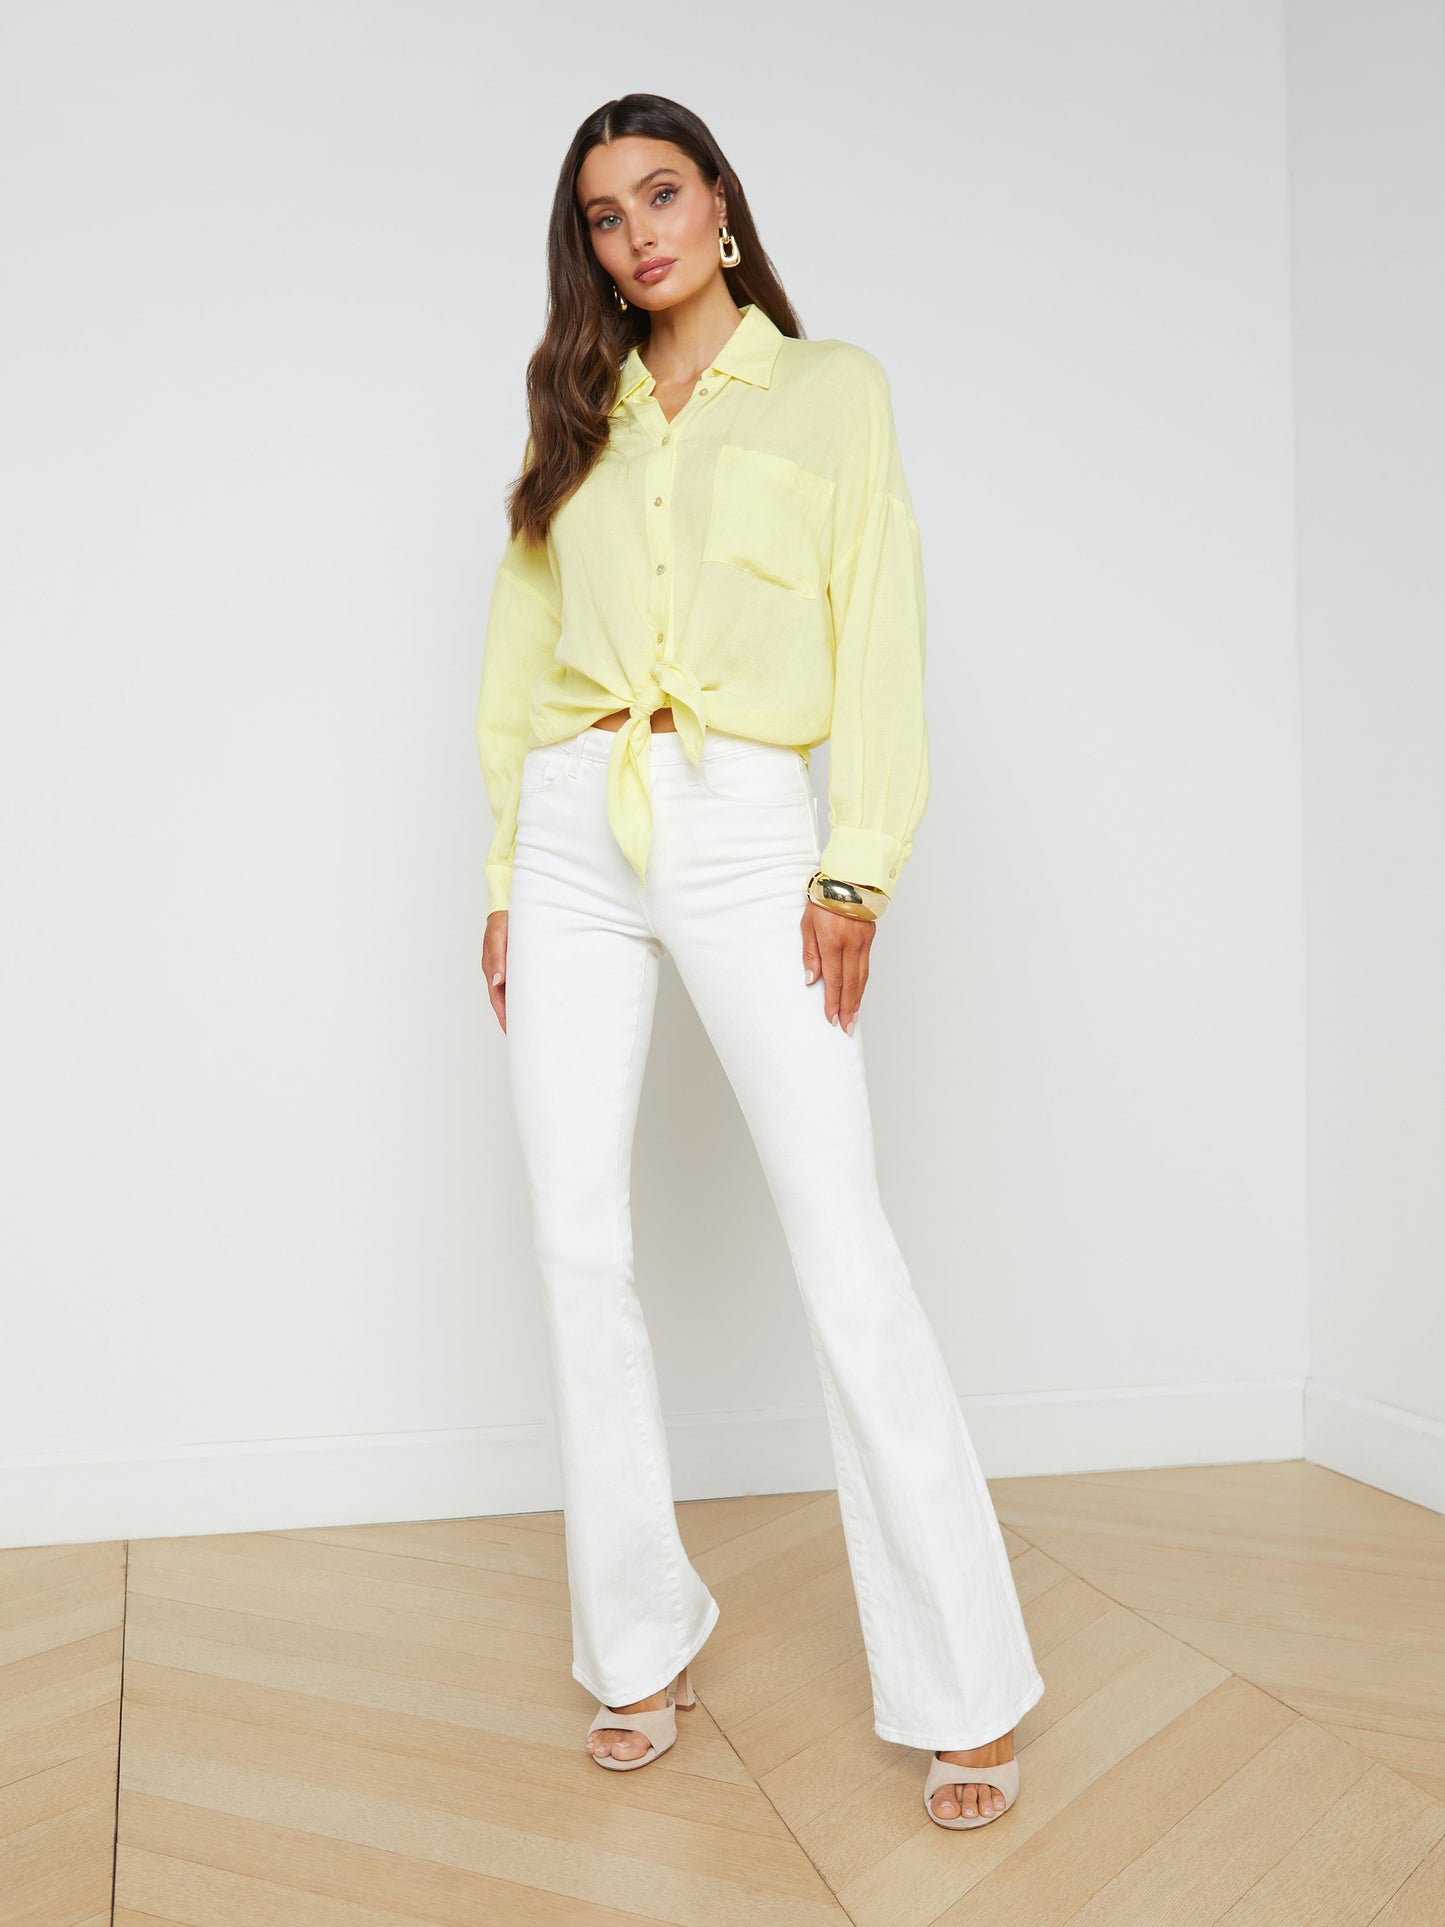 Lagence Talitha Tie Blouse